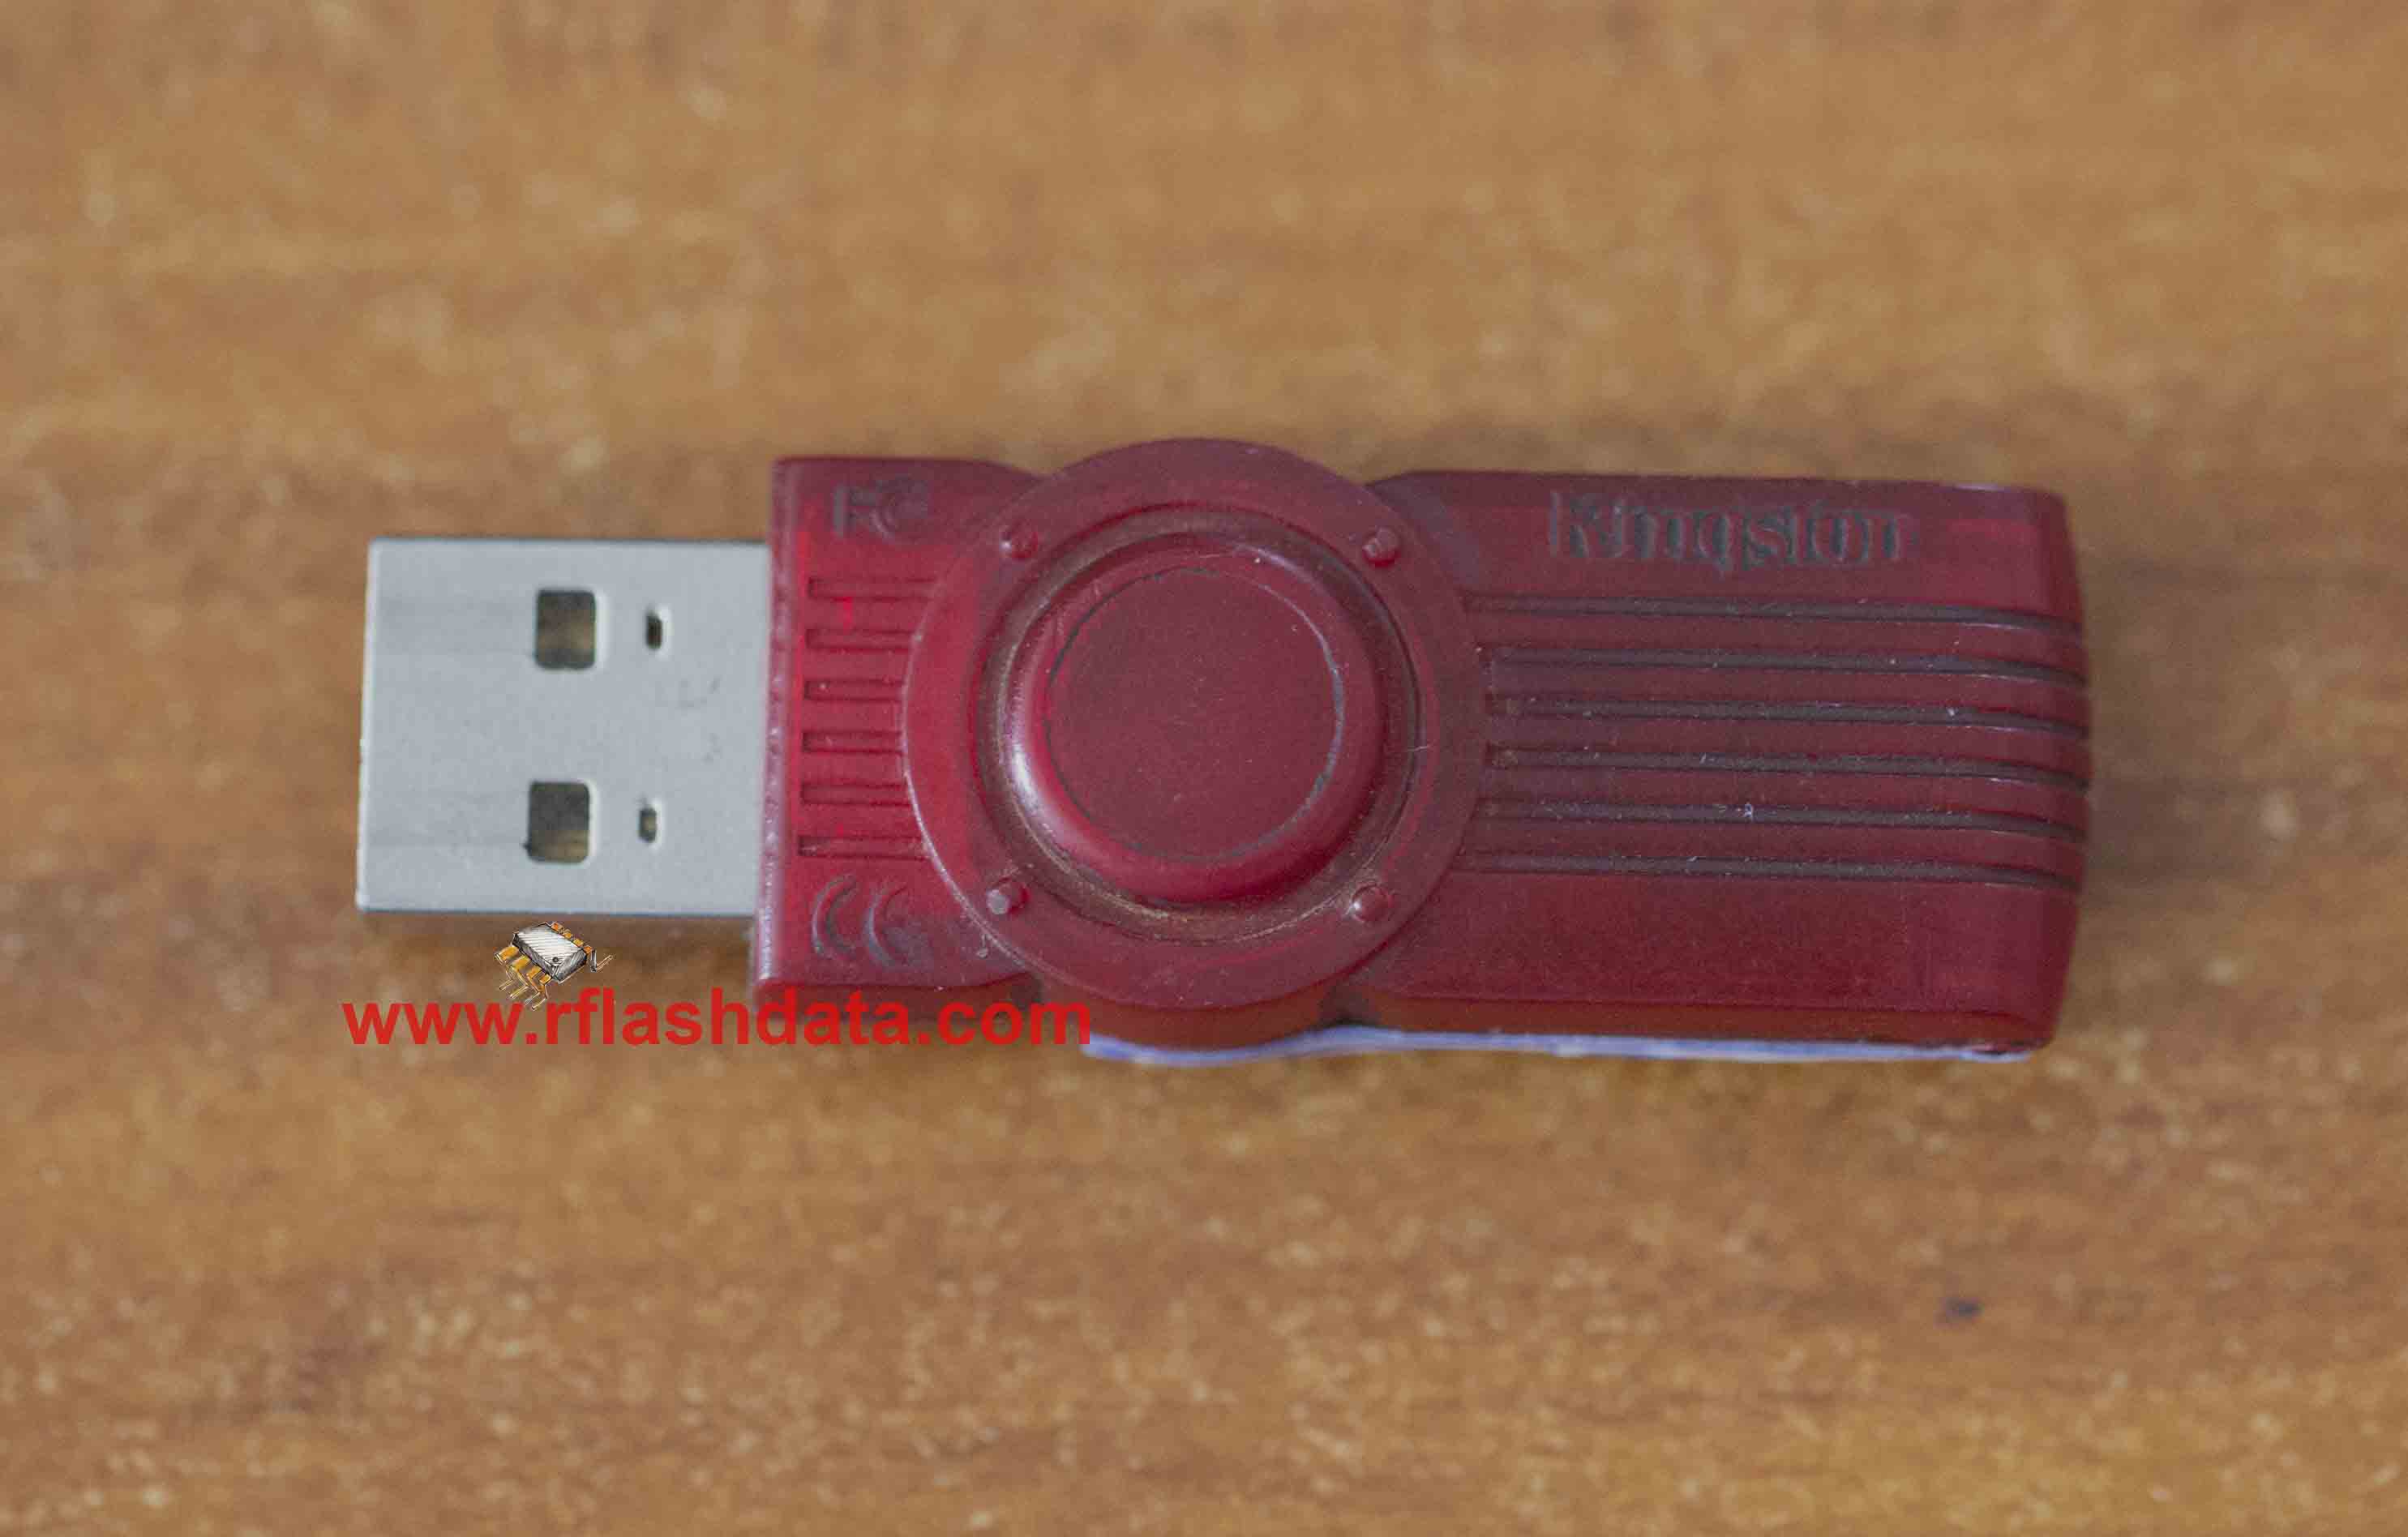 kingston DT101G2 flash drive data recovery